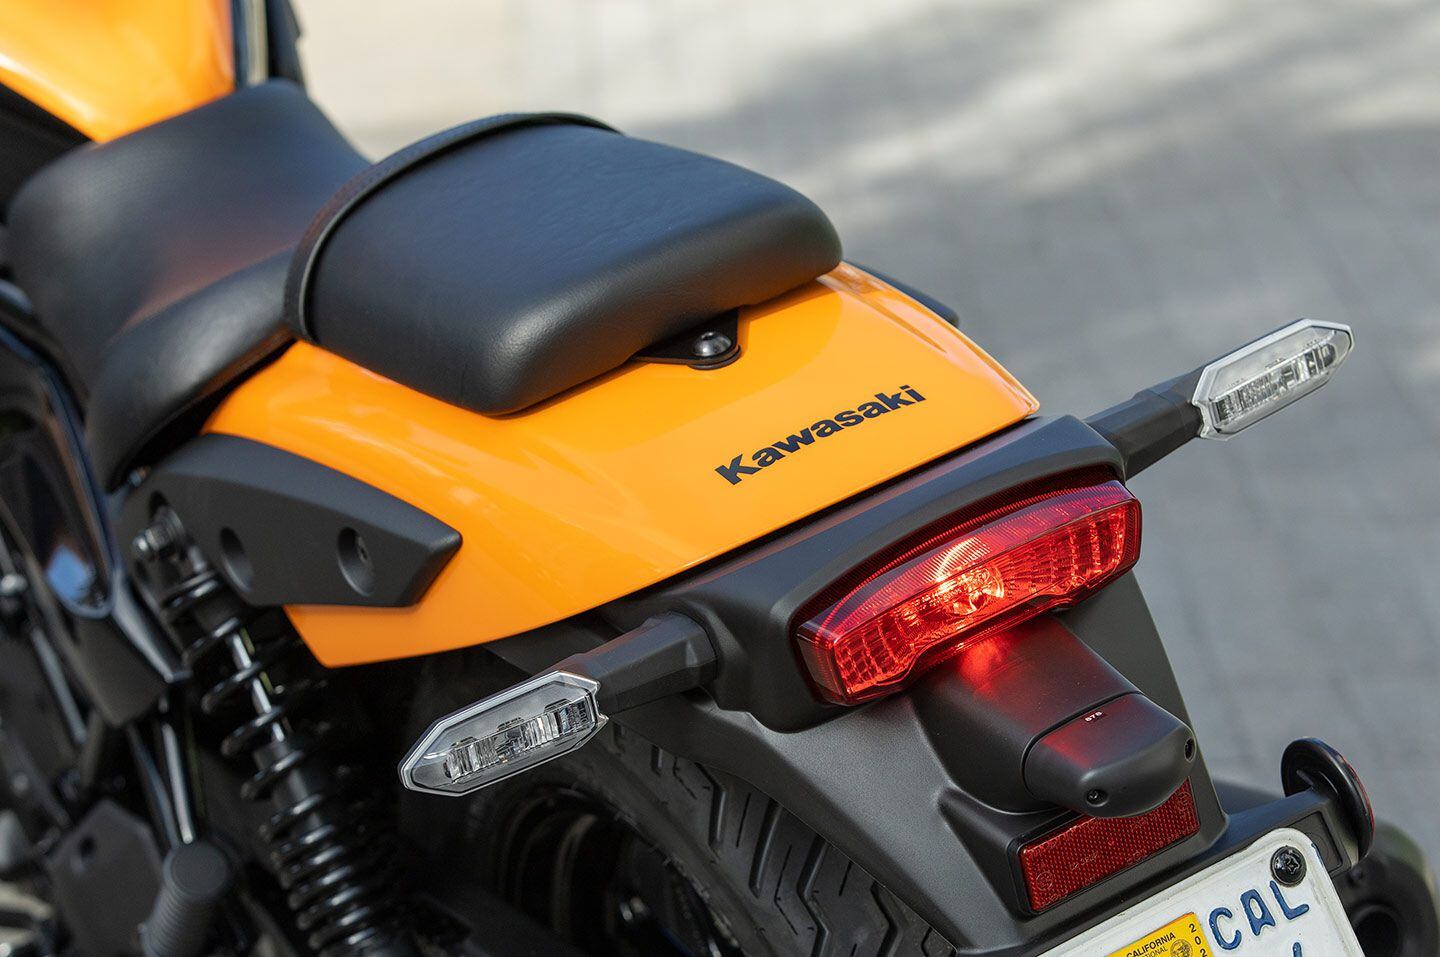 Maintaining the long and low styling of a cruiser, Kawasaki designed the tailsection to pay homage to the Eliminator lineage.